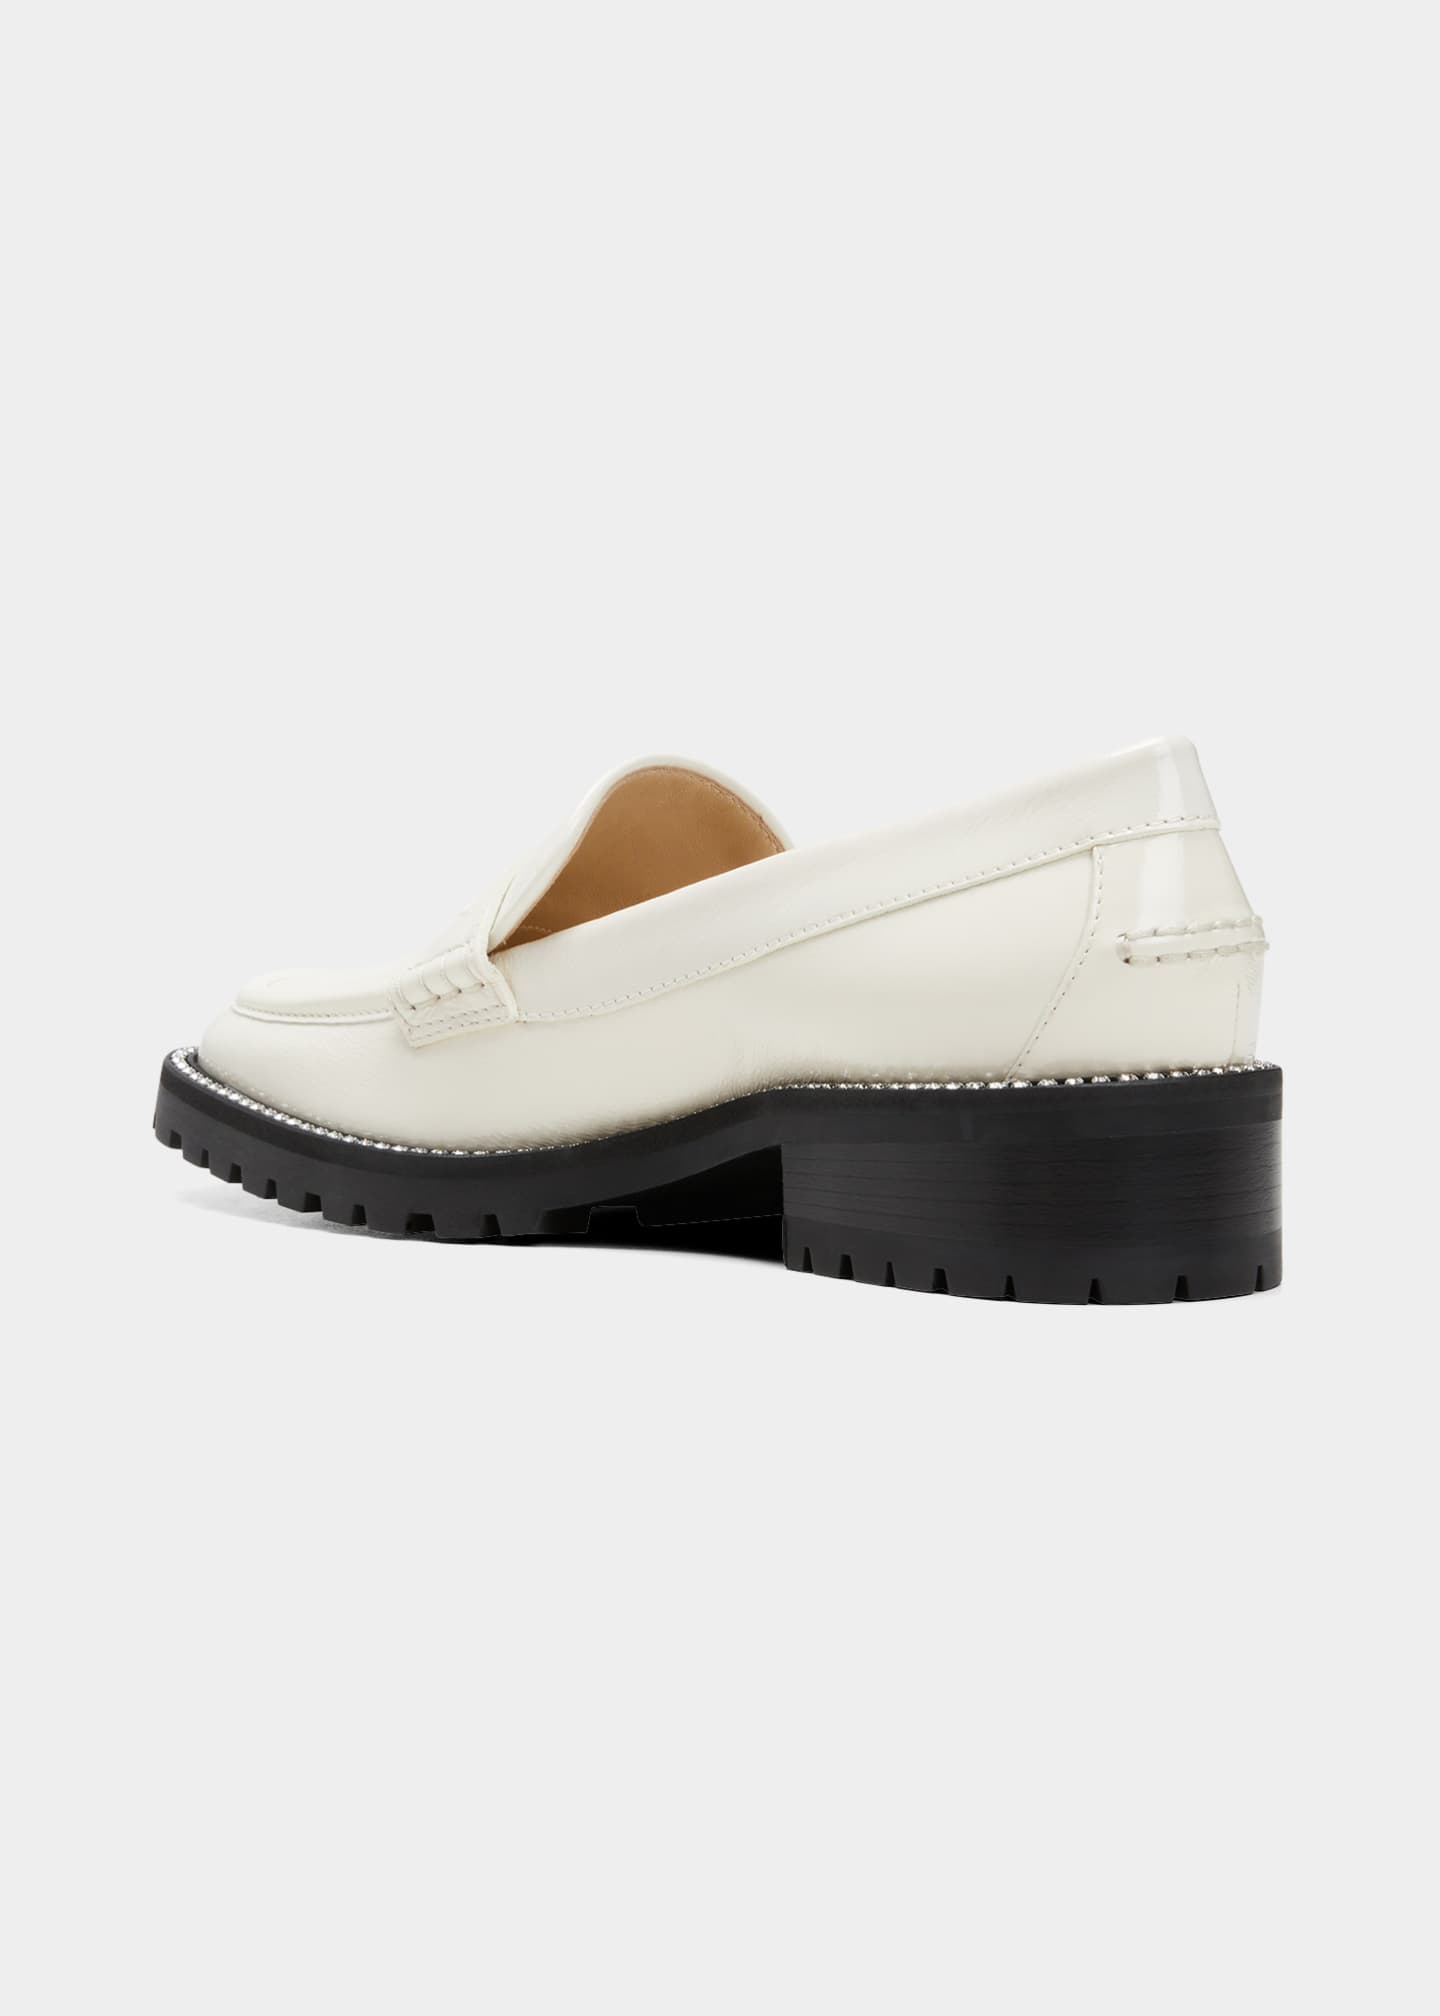 Jimmy Choo Deanna Leather Penny Loafers - Bergdorf Goodman